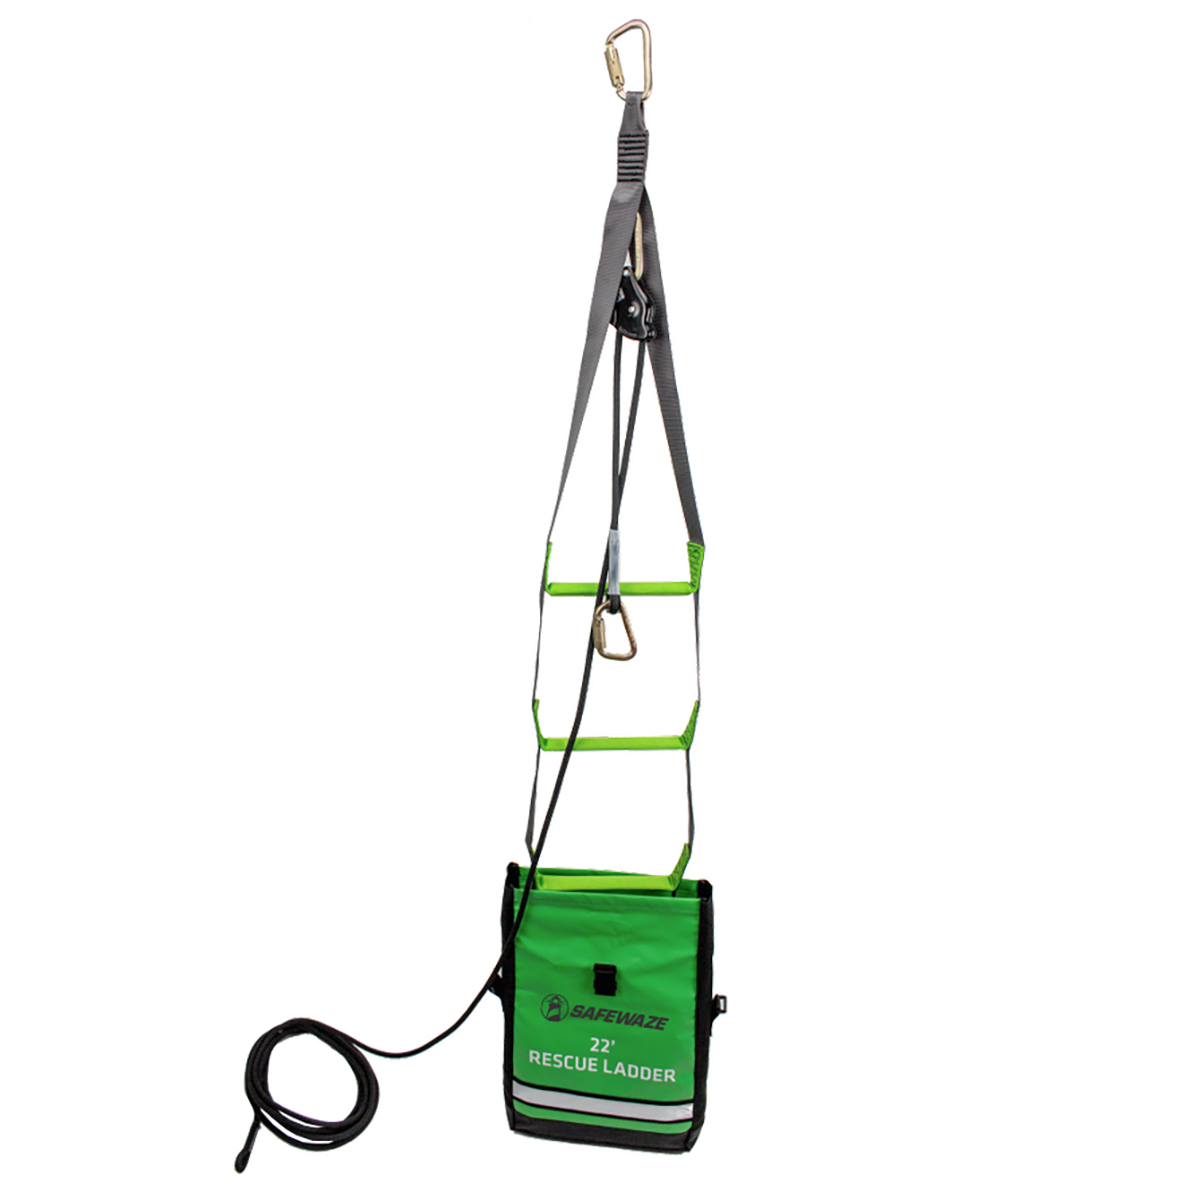 22ft Rescue Ladder with Belay - Fall Protection